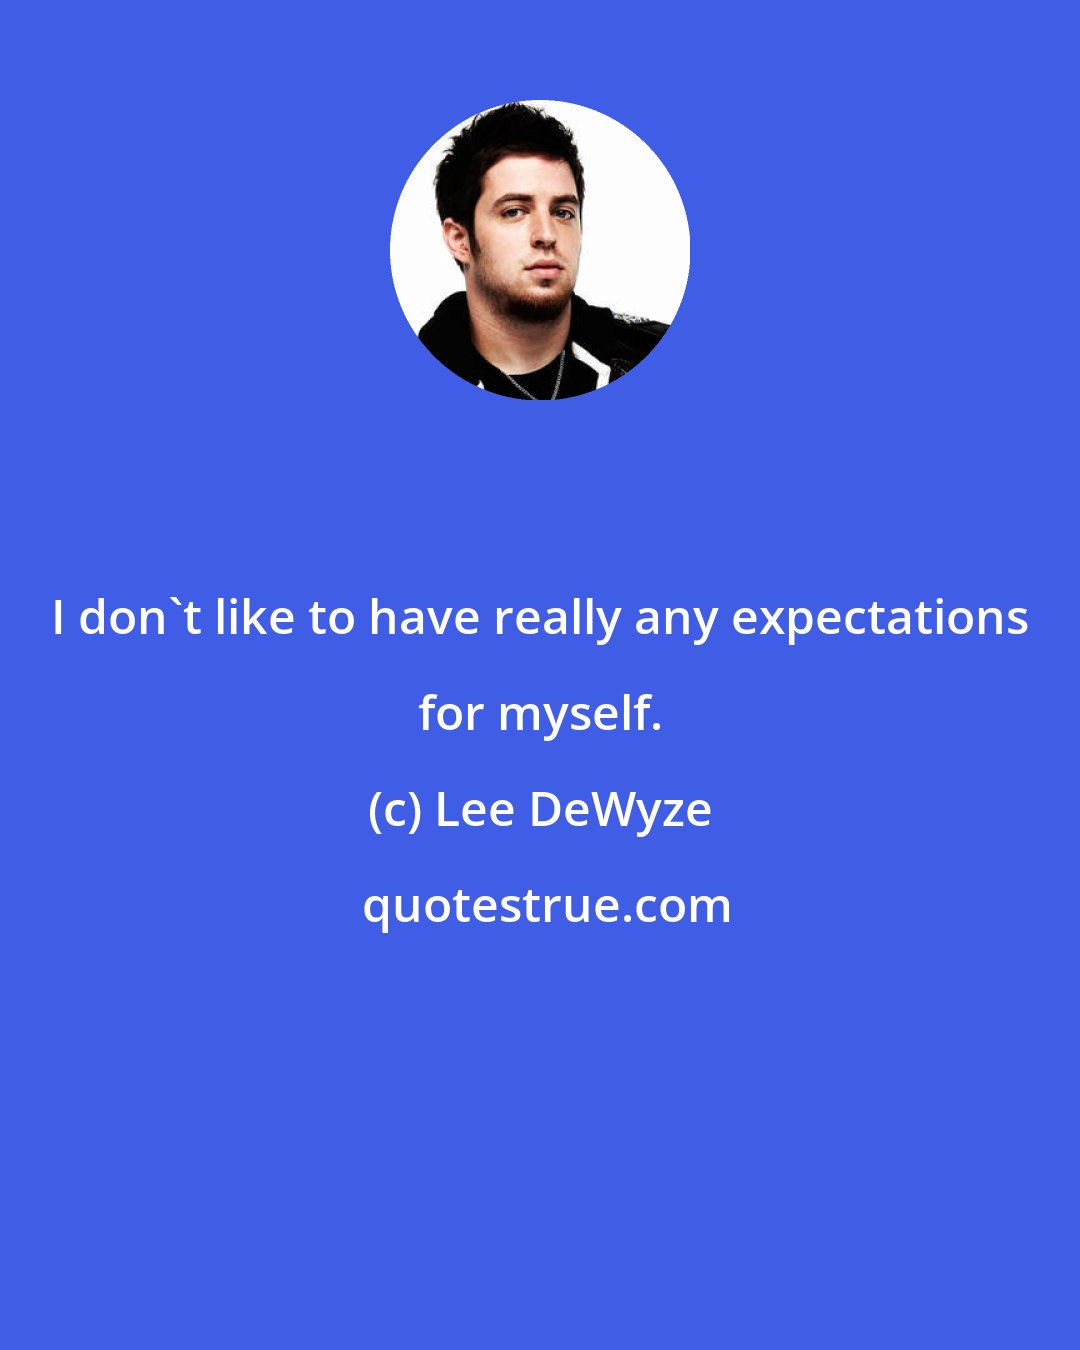 Lee DeWyze: I don't like to have really any expectations for myself.